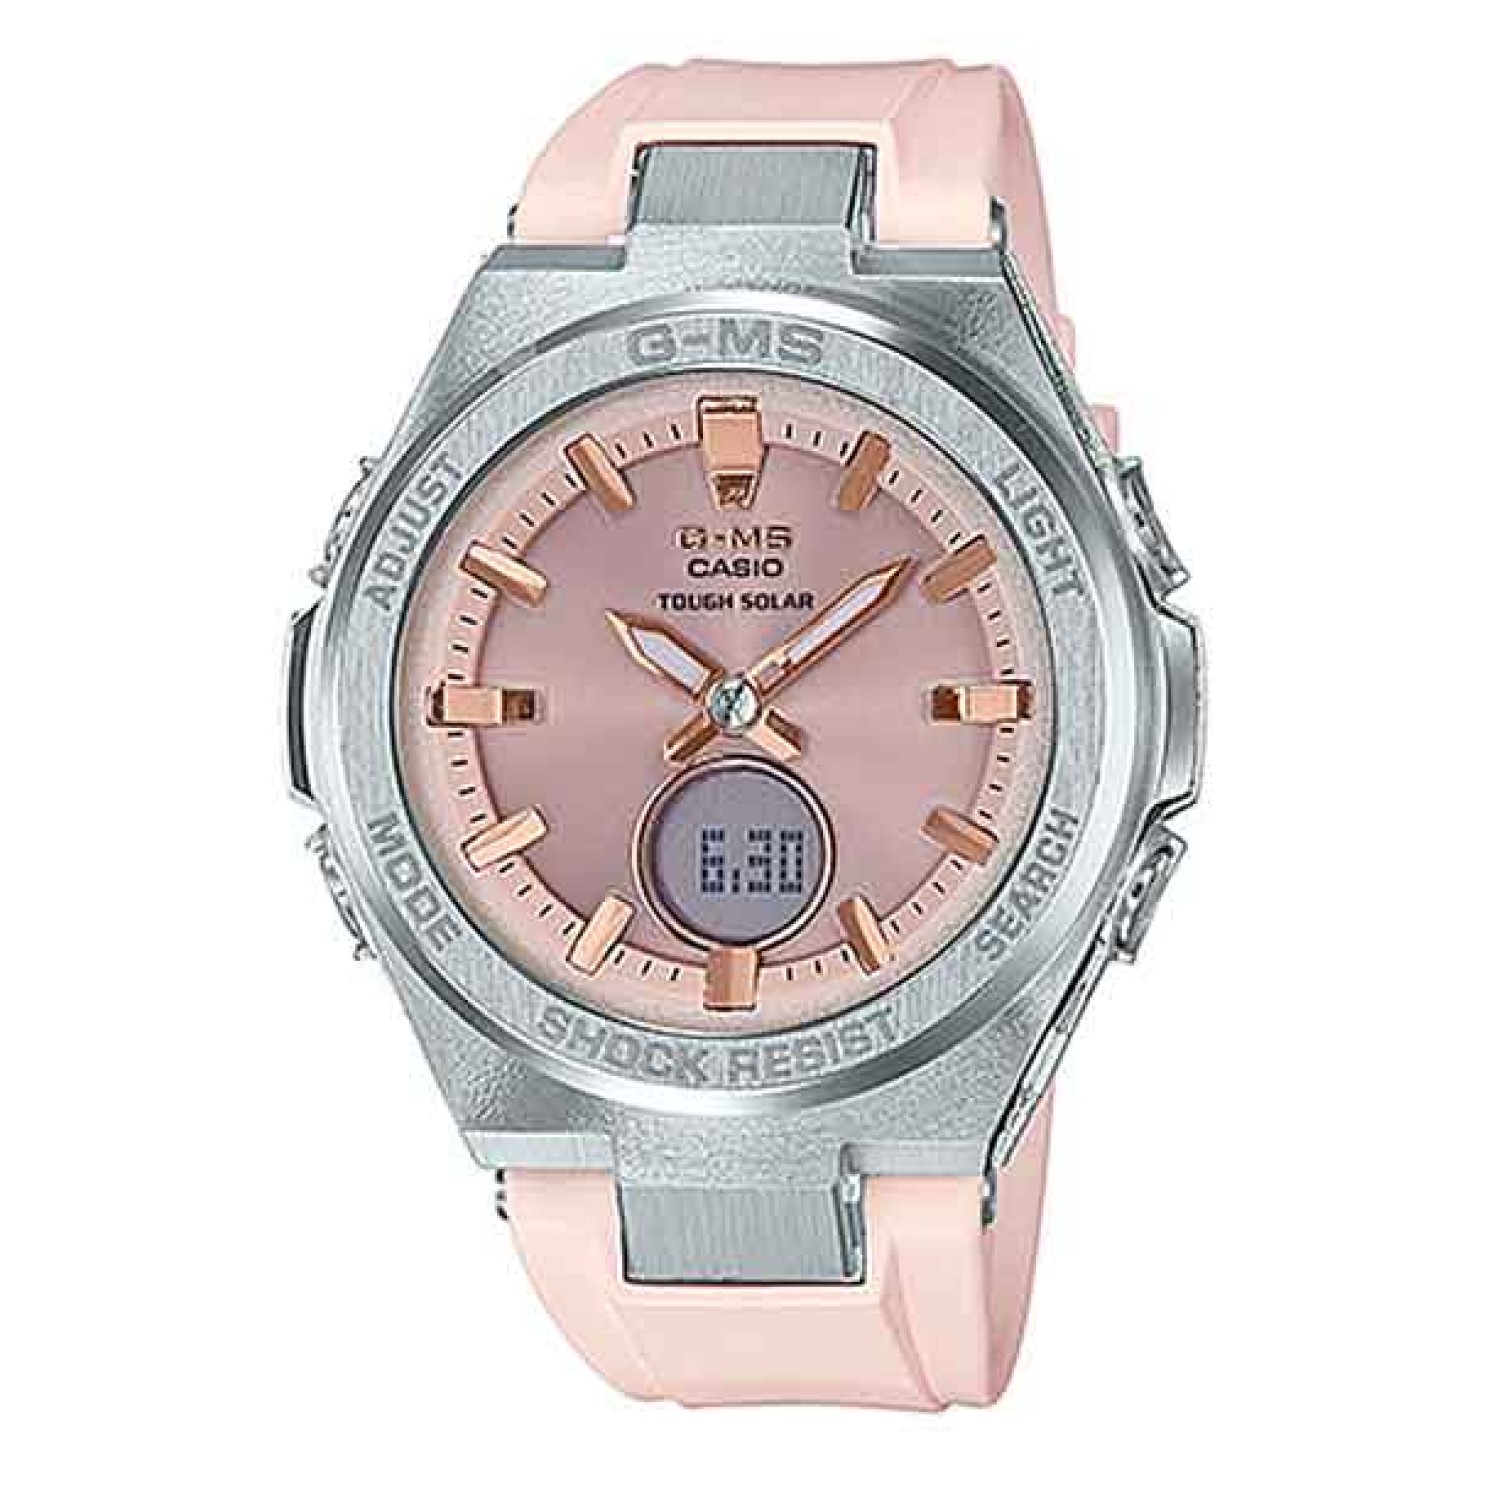 MSGS200-4A Casio BabY-G  G-MS Watches. From the BABY-G G-MS lineup of watches for the active and sophisticated woman of today comes a selection of new metal and resin models. The overall sharpness of these designs comes from cases, bezels, and buckles mad